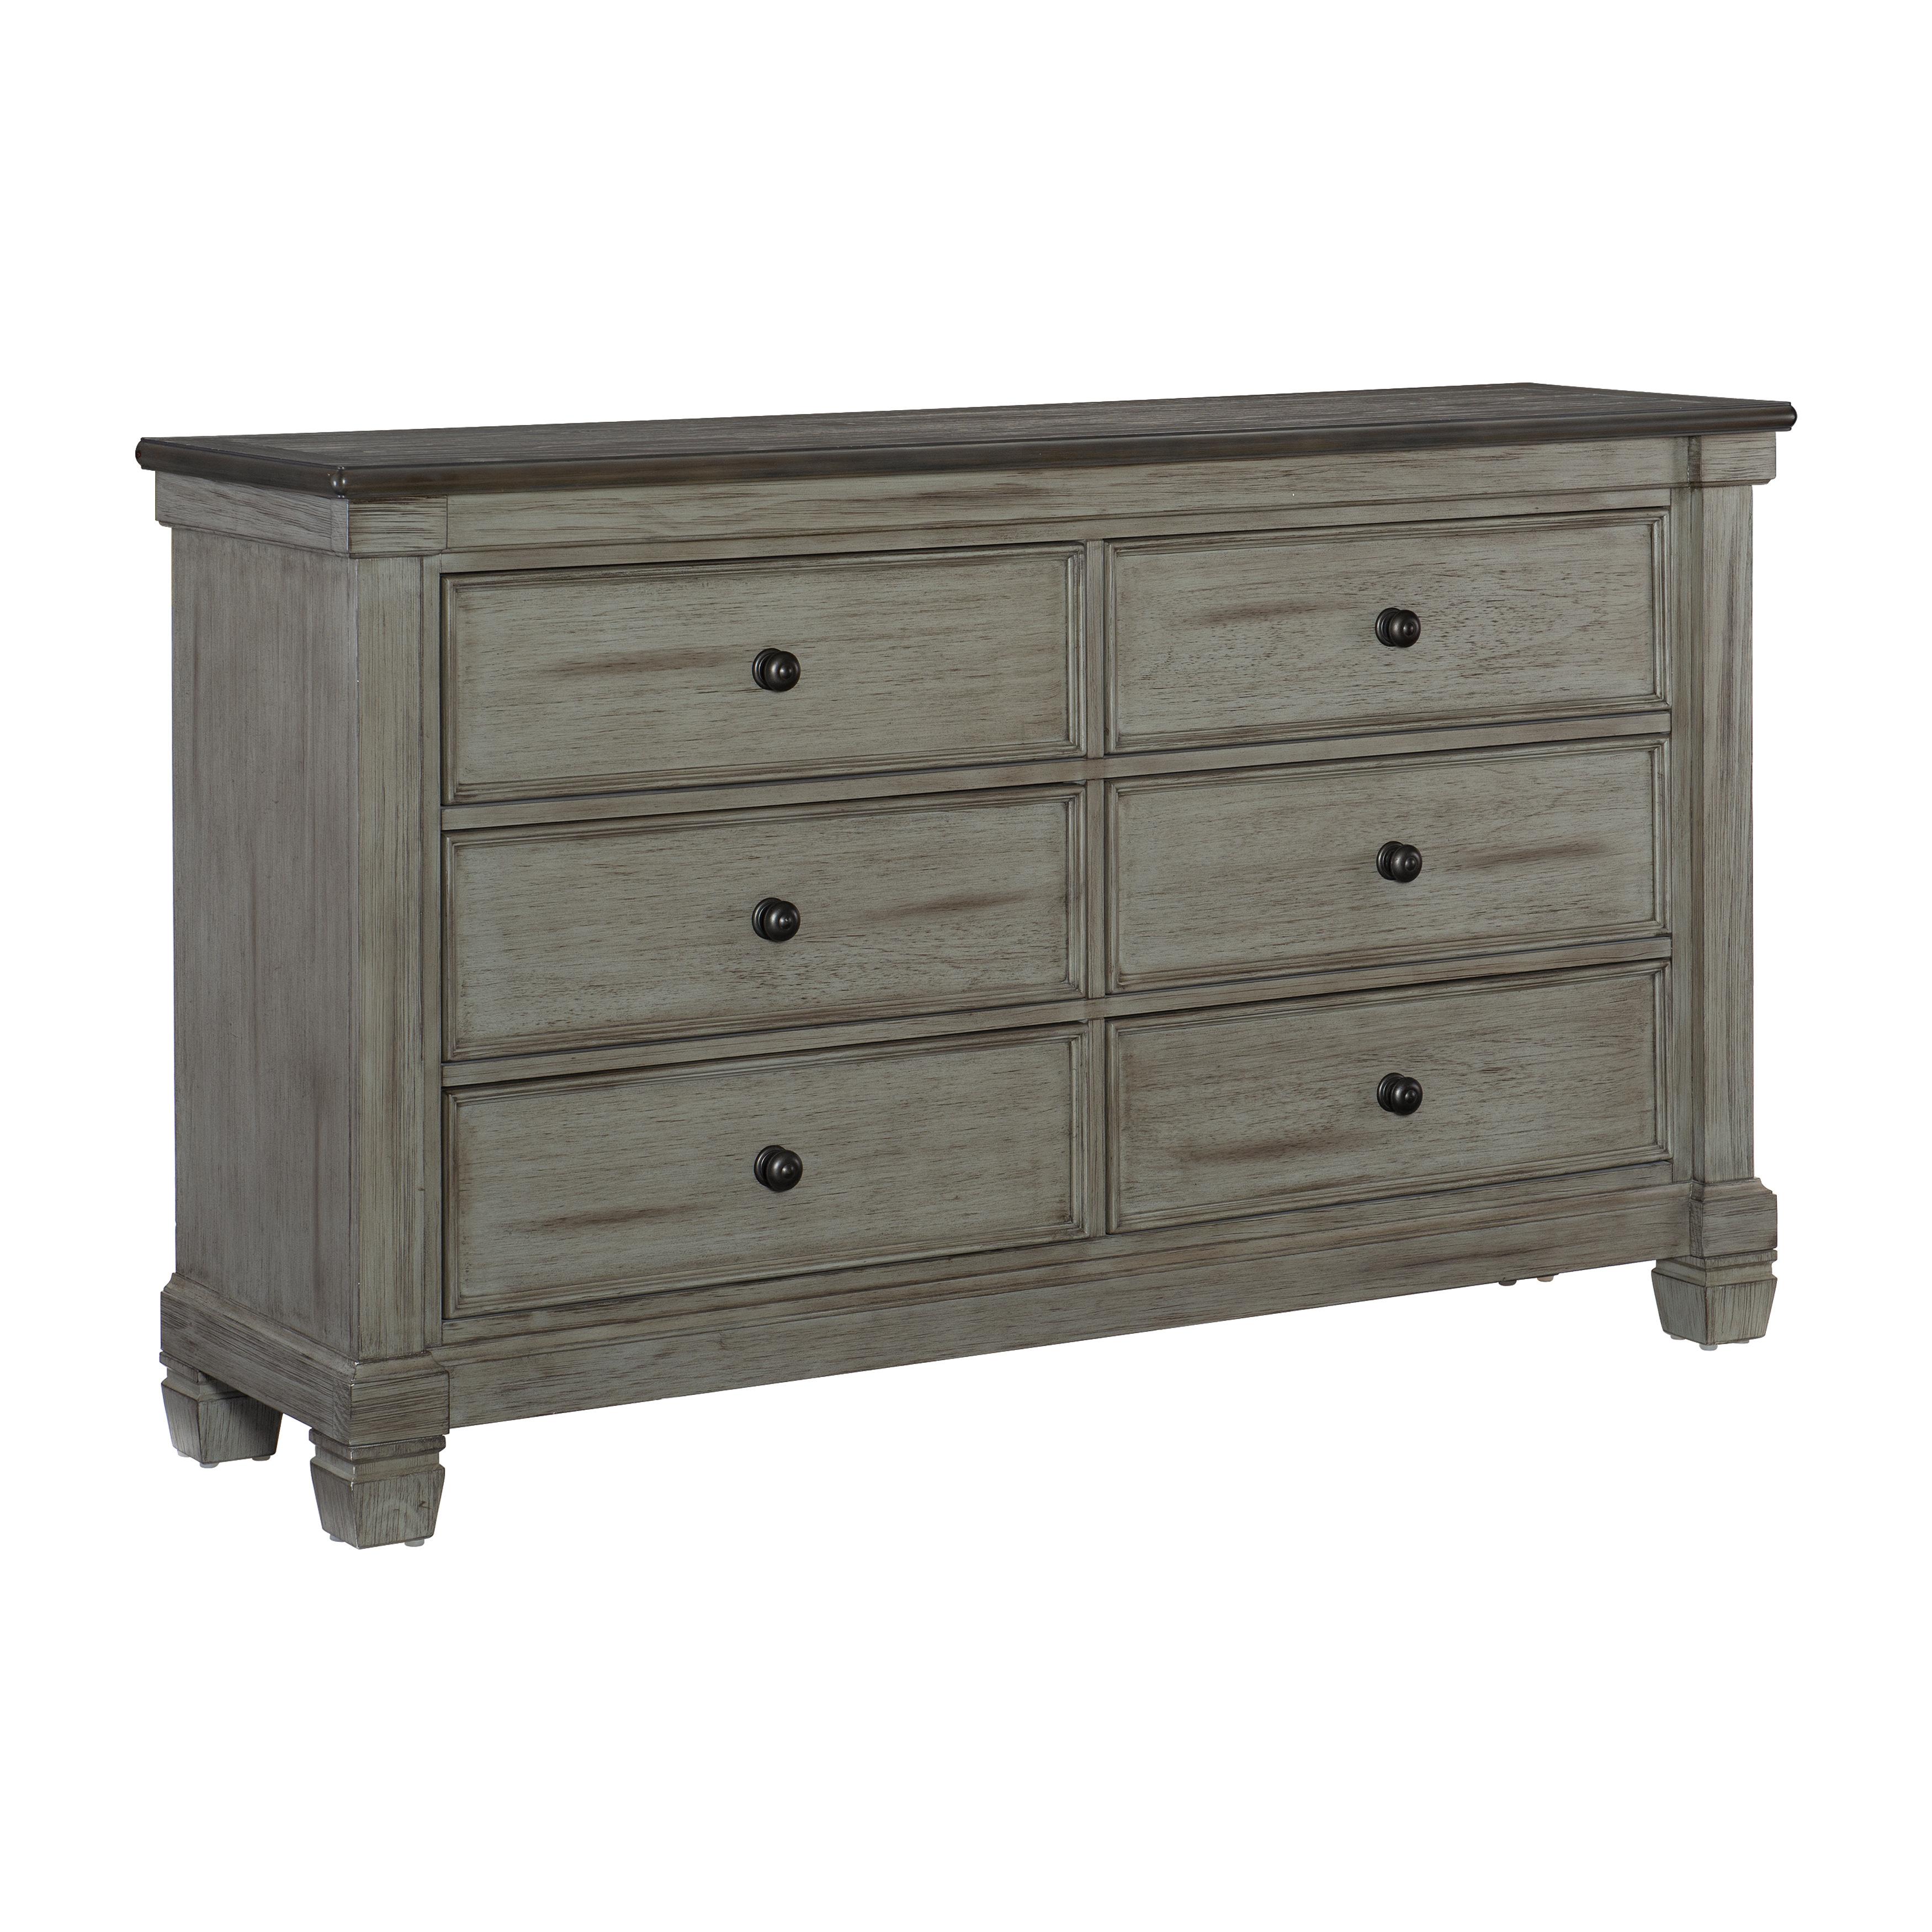 Transitional Dresser 1626GY-5 Weaver 1626GY-5 in Gray, Coffee 